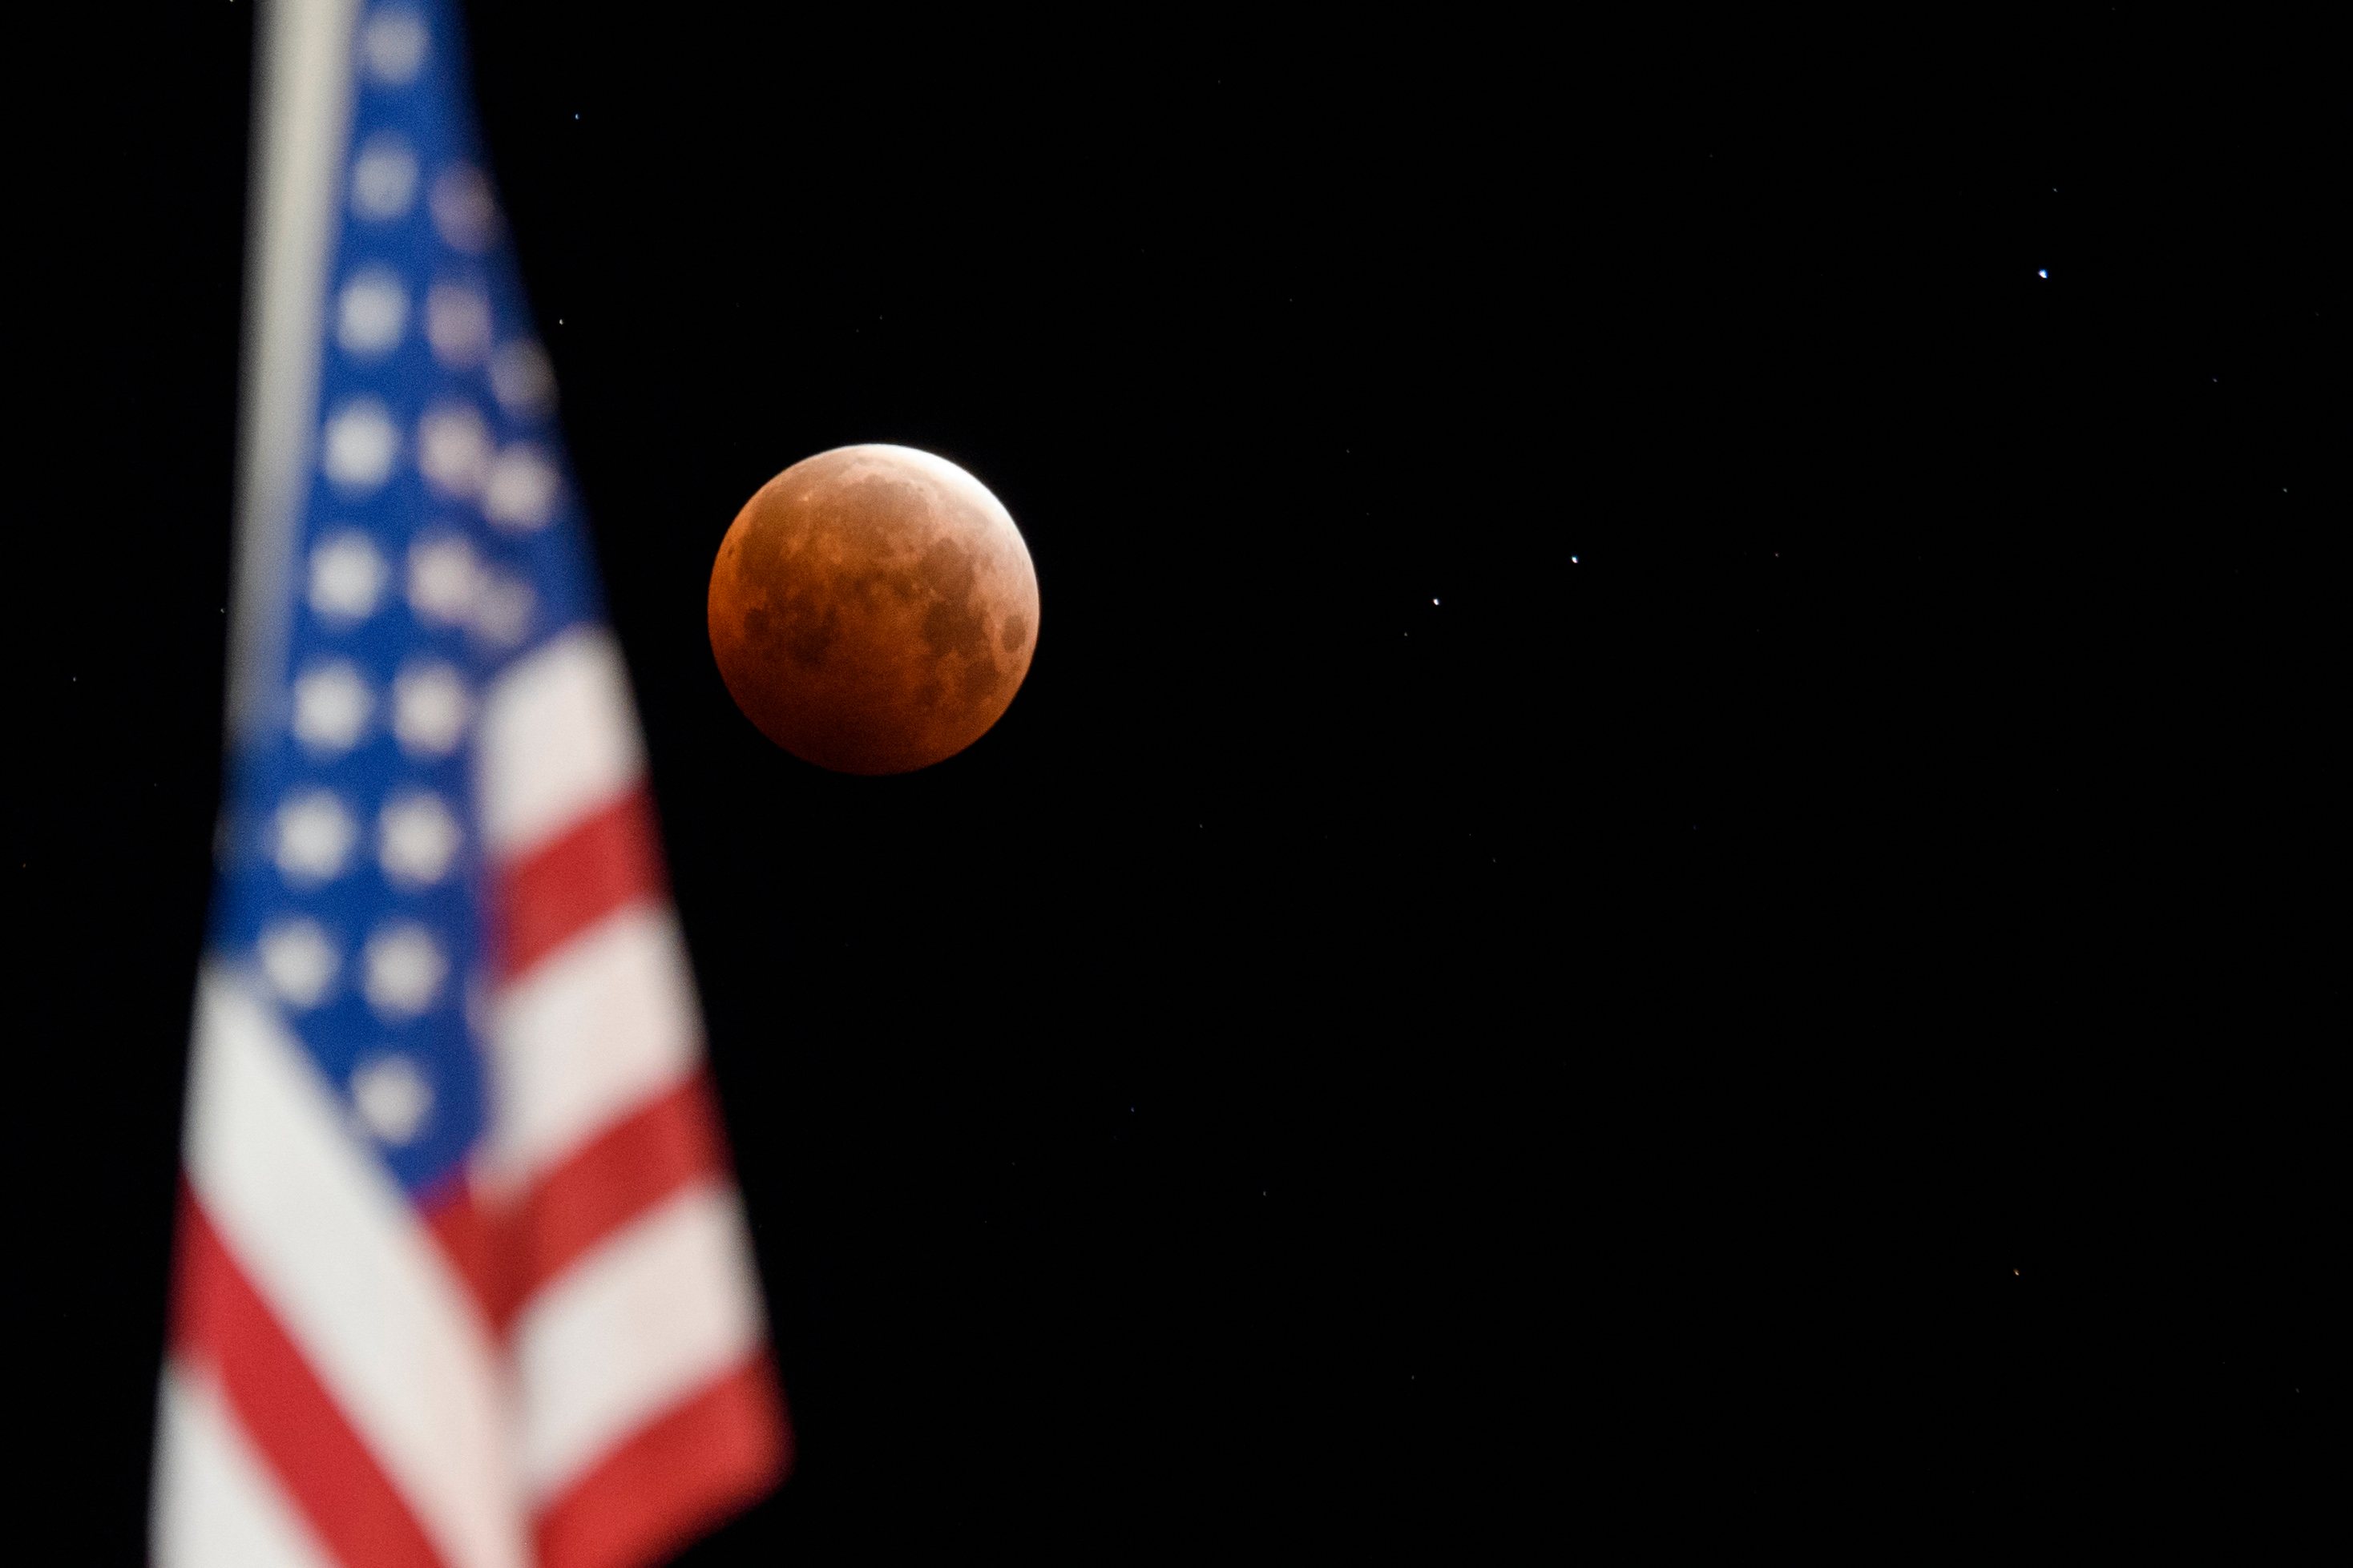 US-SCIENCE-ASTRONOMY-MOON-ECLIPSE